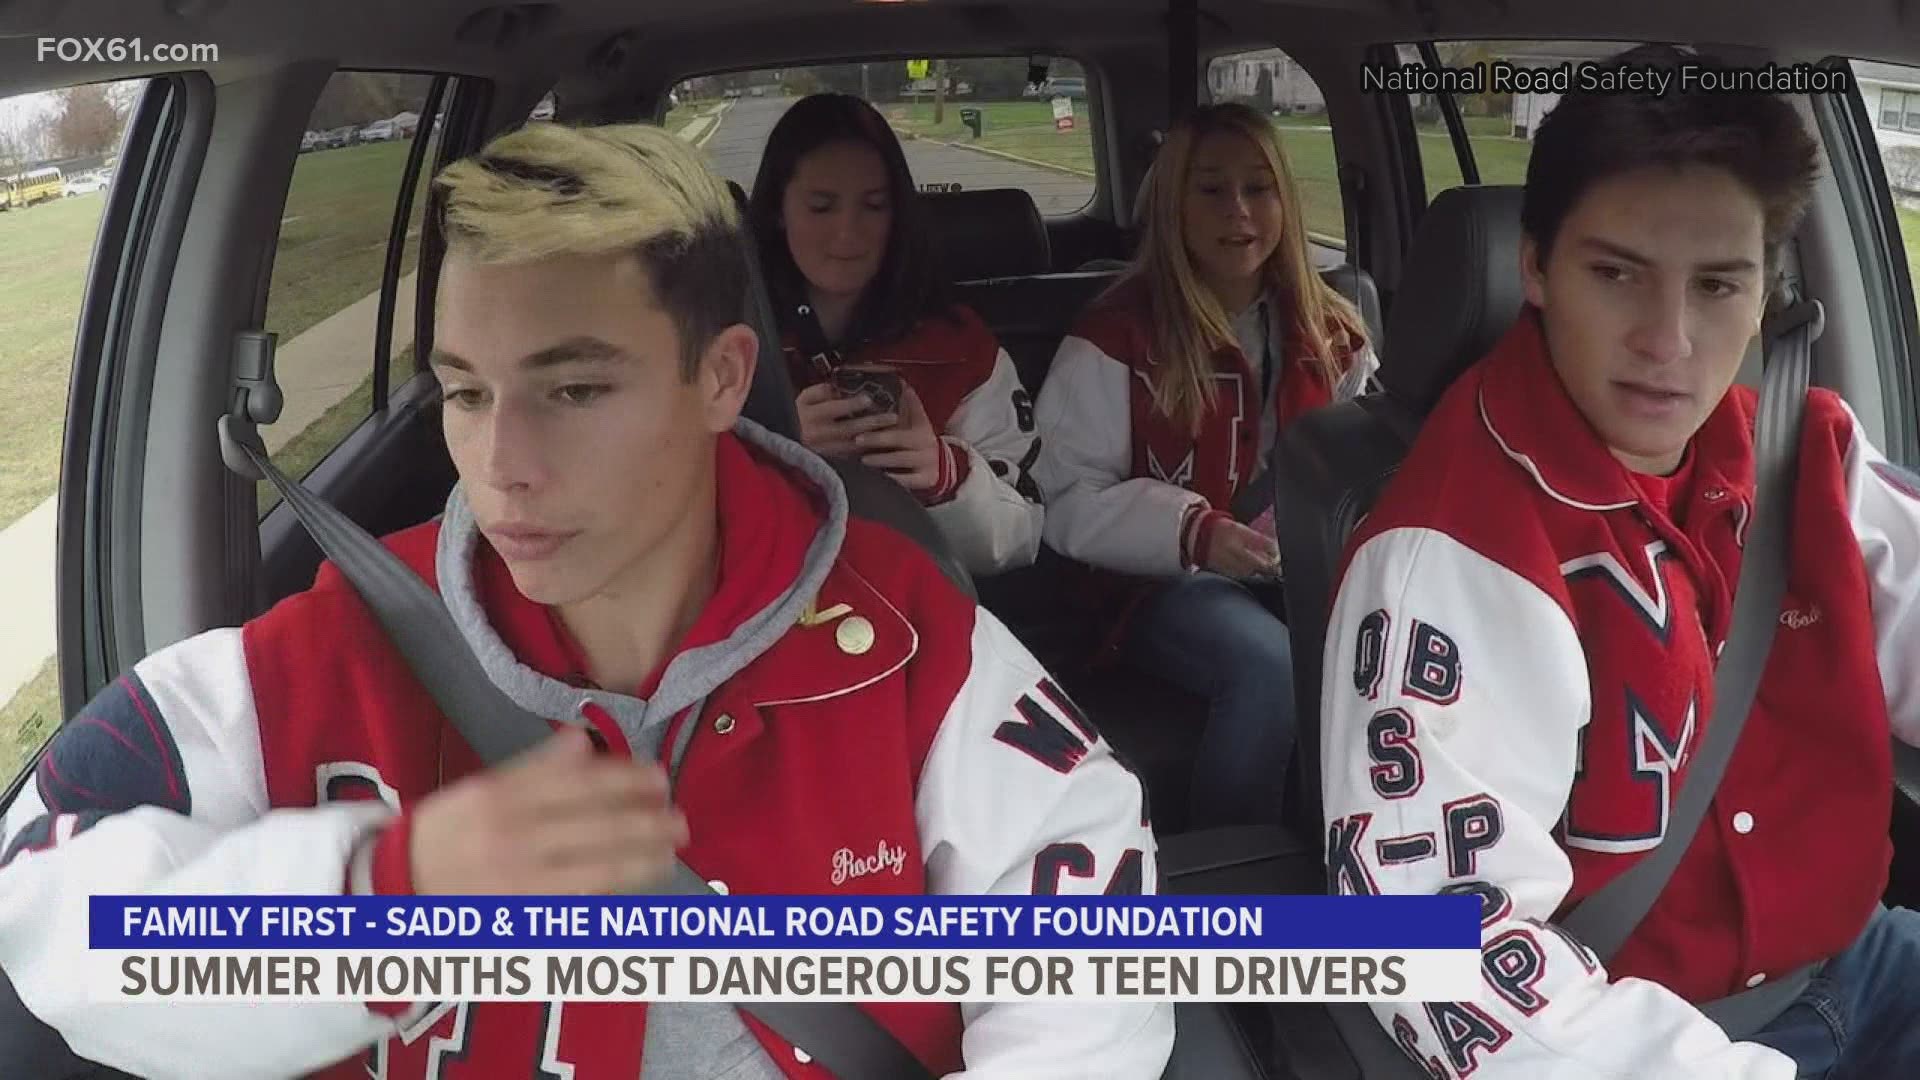 Summer months are most dangerous for teen drivers